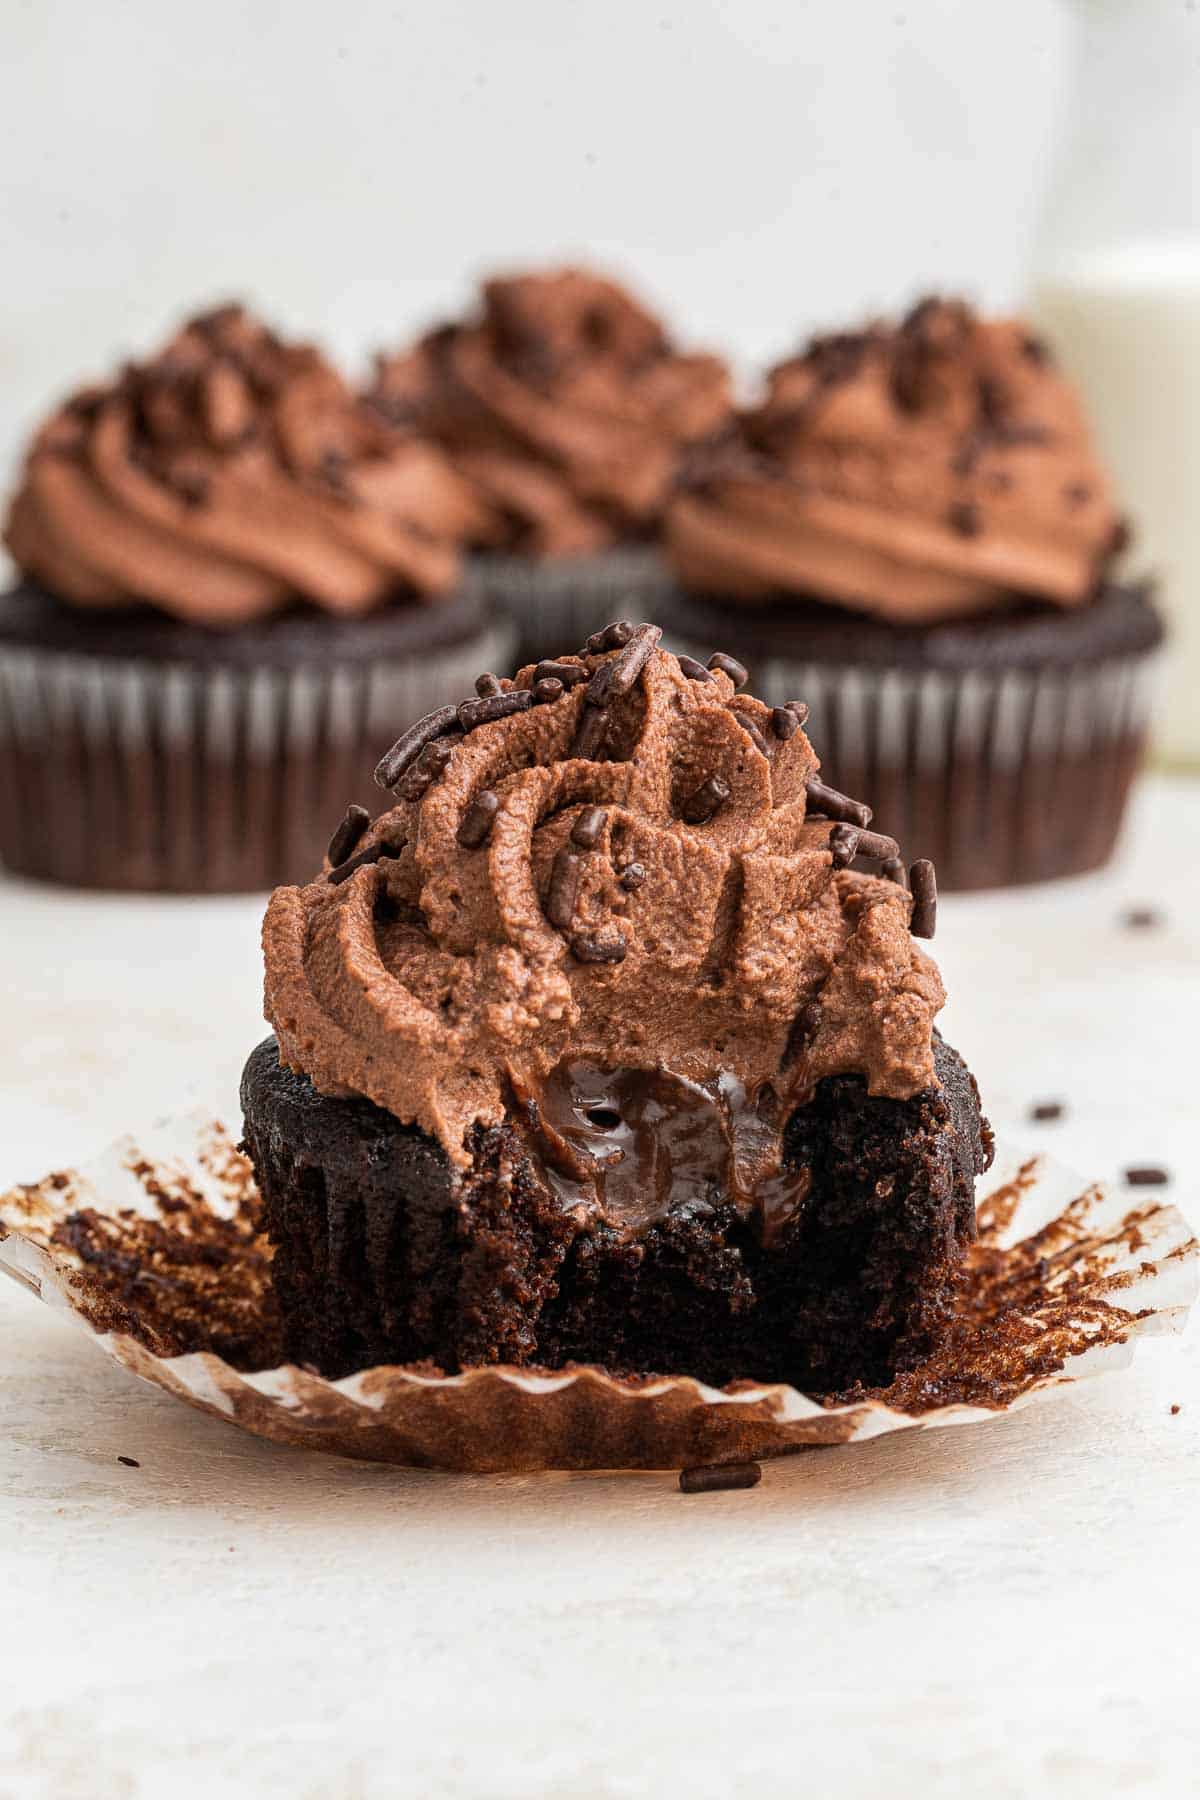 Phot of chocolate cupcake cut in half with swirly chocolate frosting.